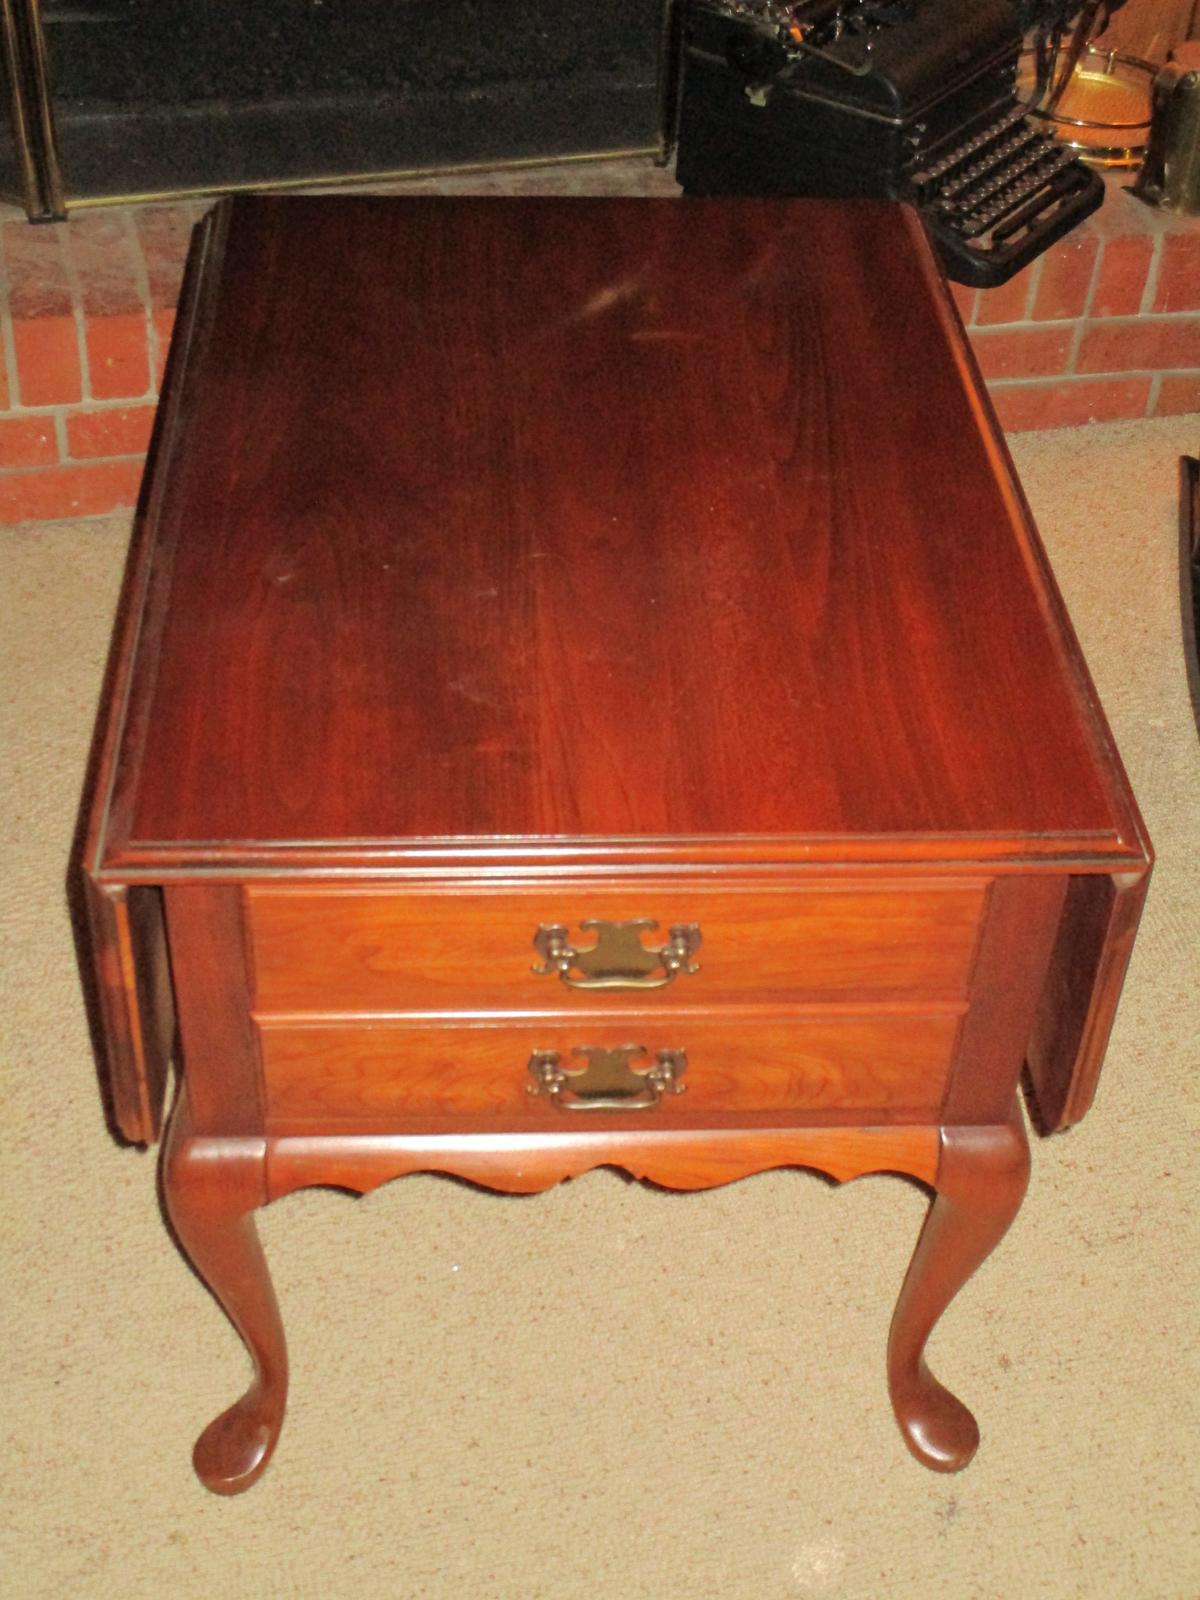 Pennsylvania House Chippendale Style Two Drawer Drop Leaf End Table -Queen Anne Style Legs